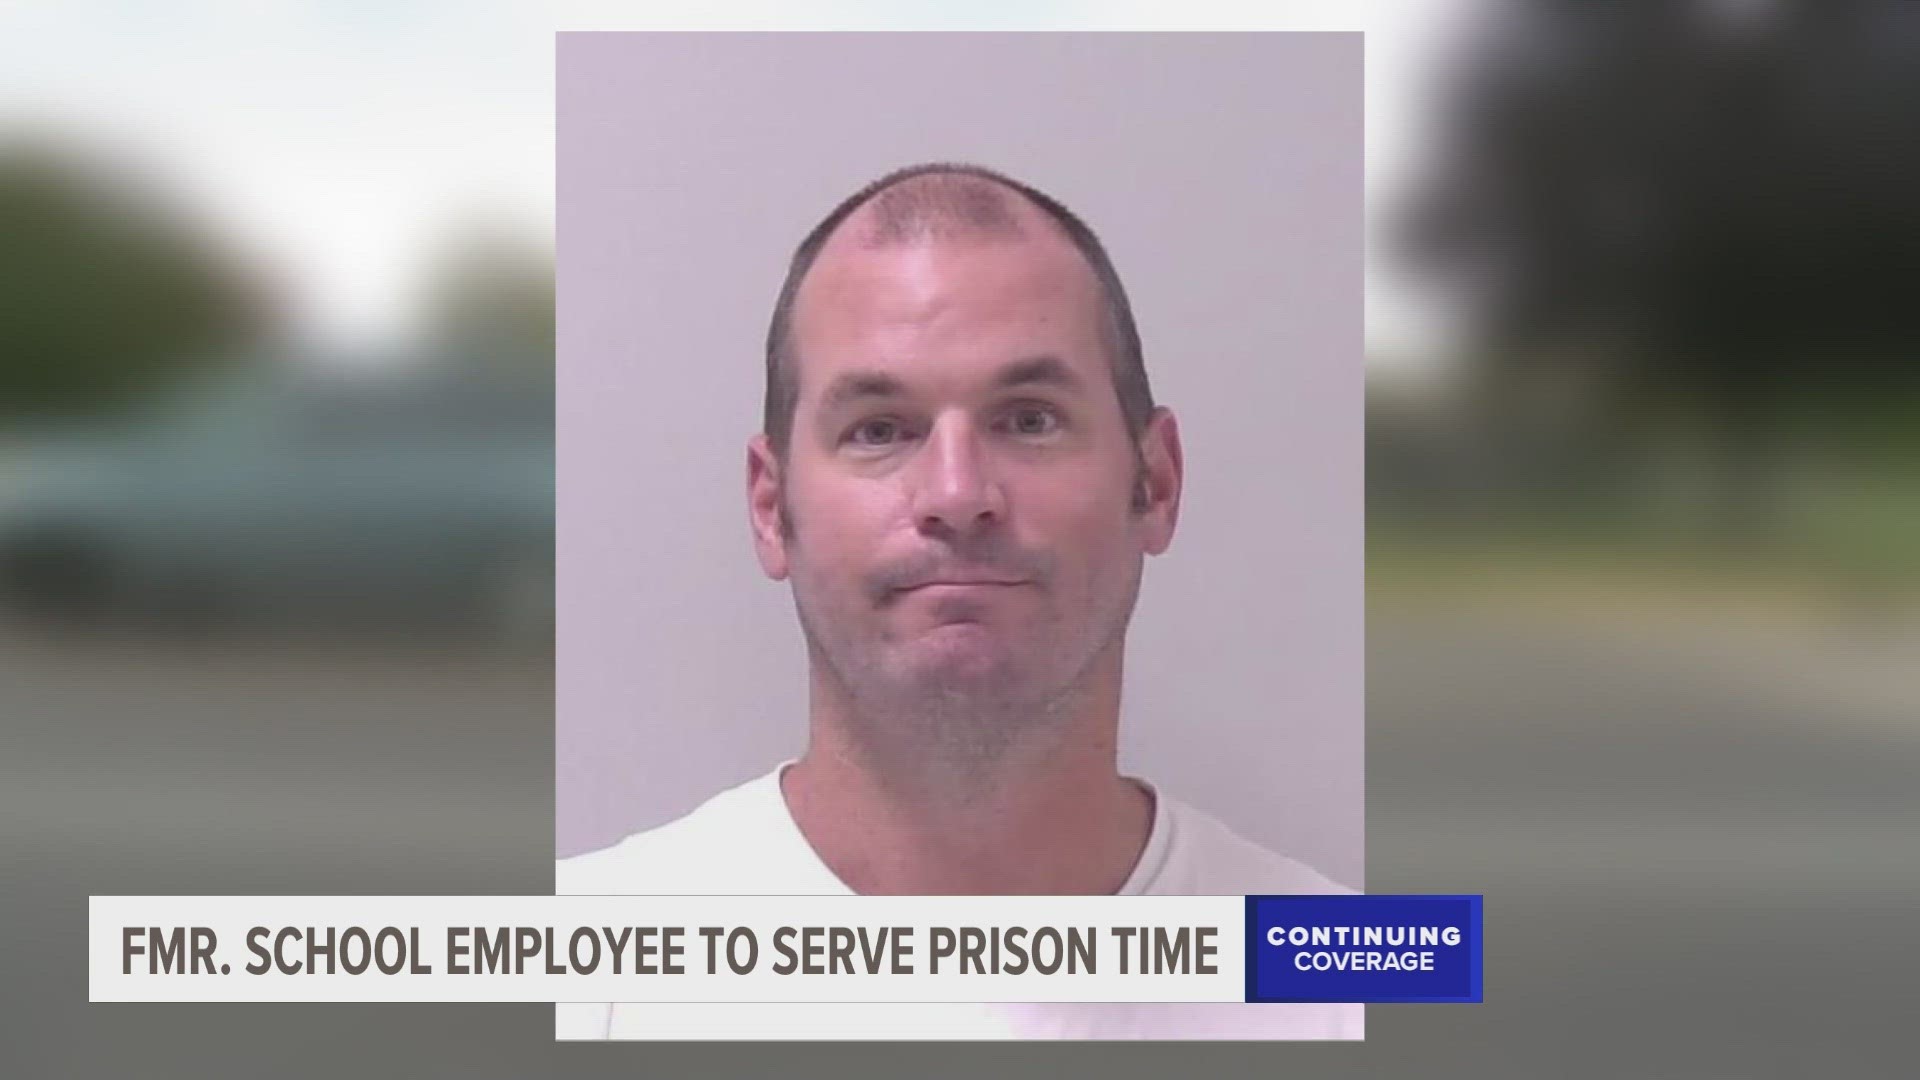 Scott Simmons was sentenced to serve between 85 months and 15 years in prison for his actions. He will get credit for 43 days already served in jail.